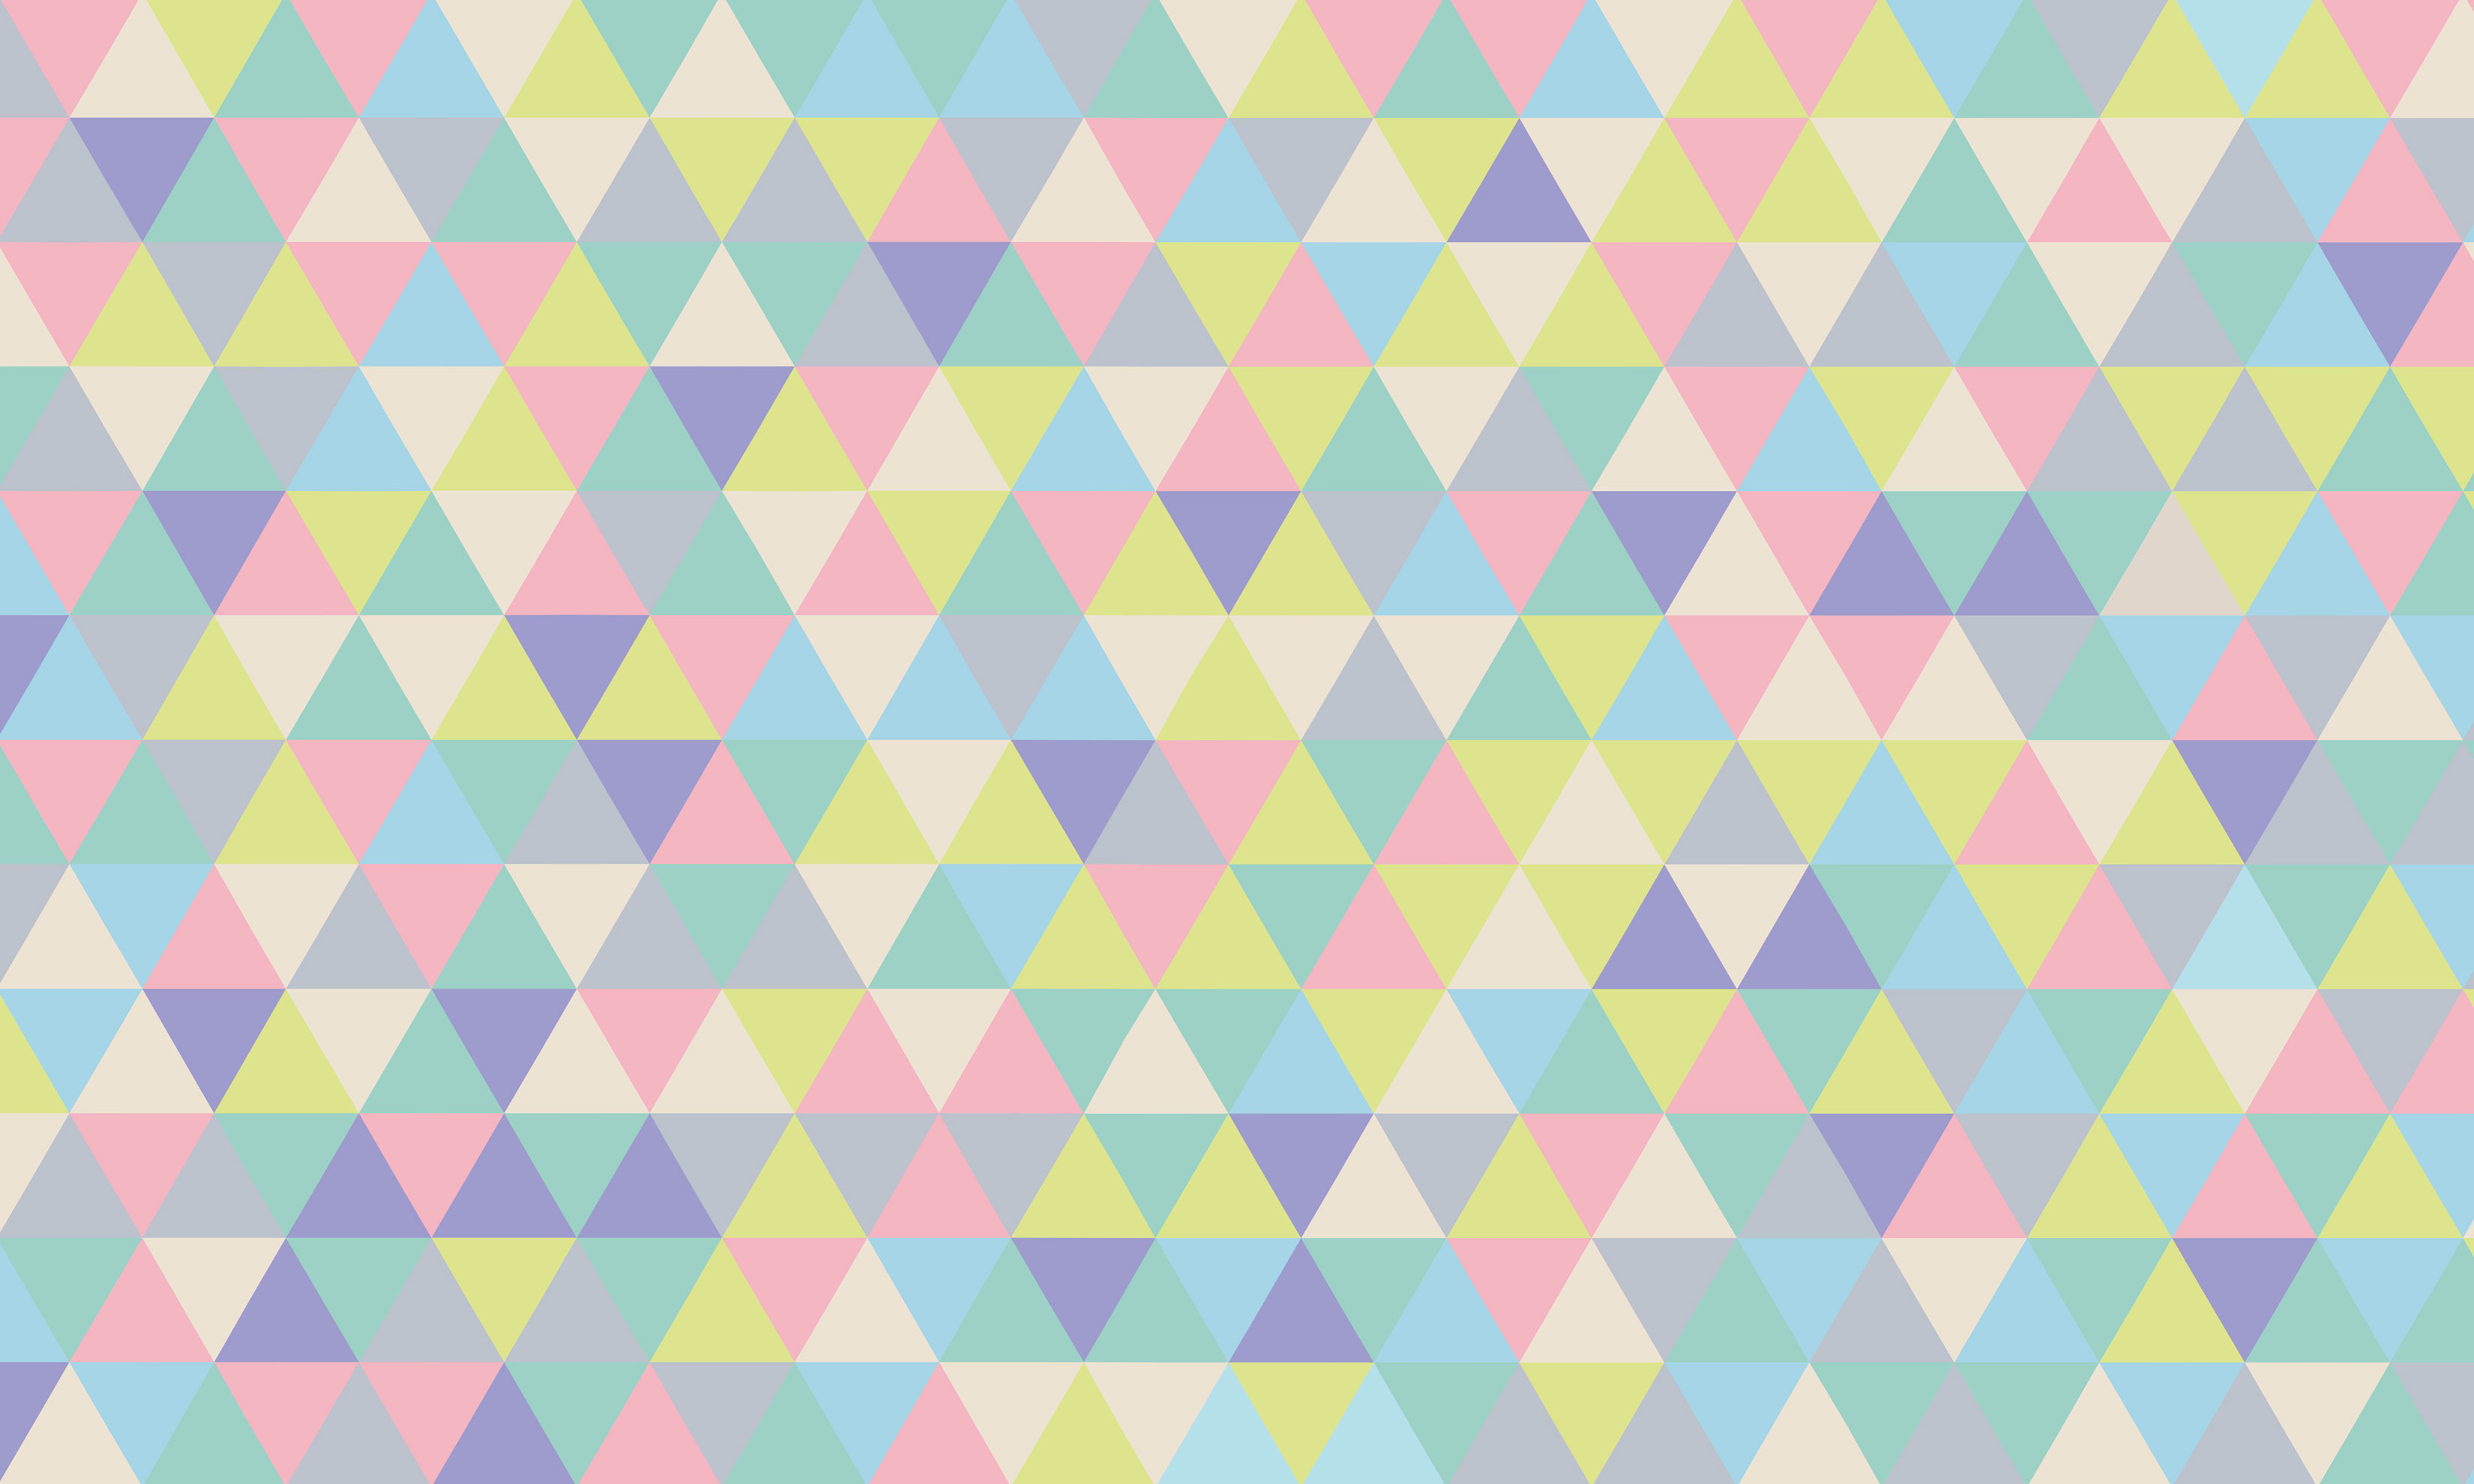 3300x1980 pastel colors wallpaper 19 - photo #17. In My Last Semester I'll Be Doing  Lots Of Things For The .